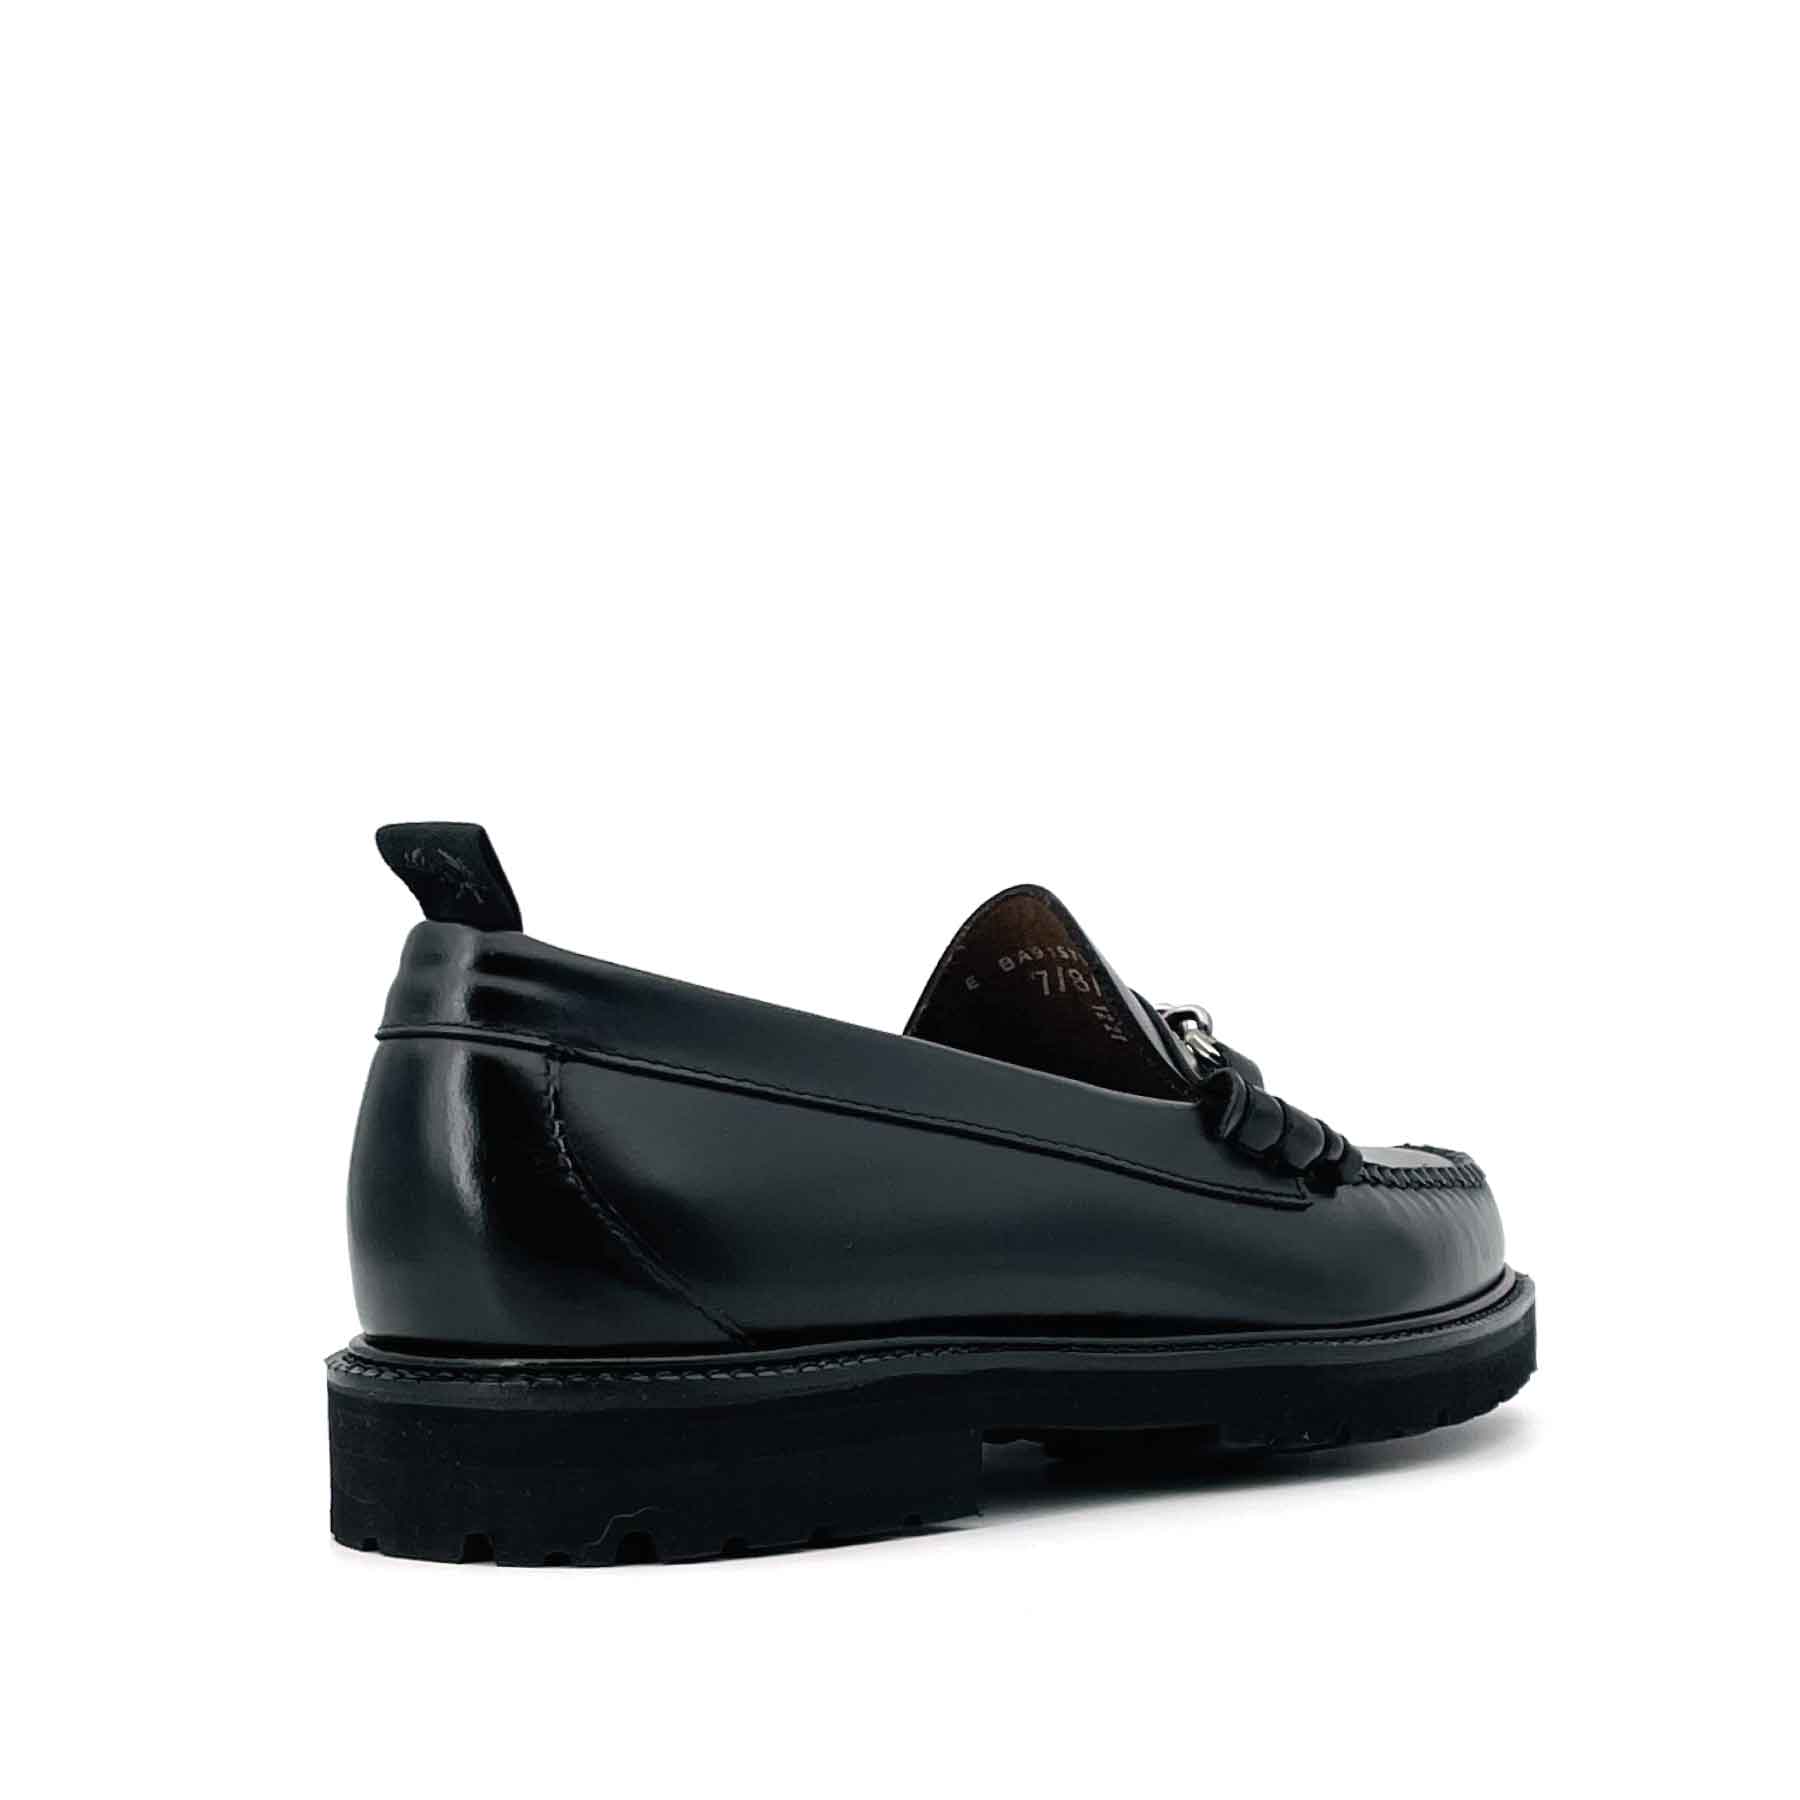 Fred Perry x G.H.BASS. Black W